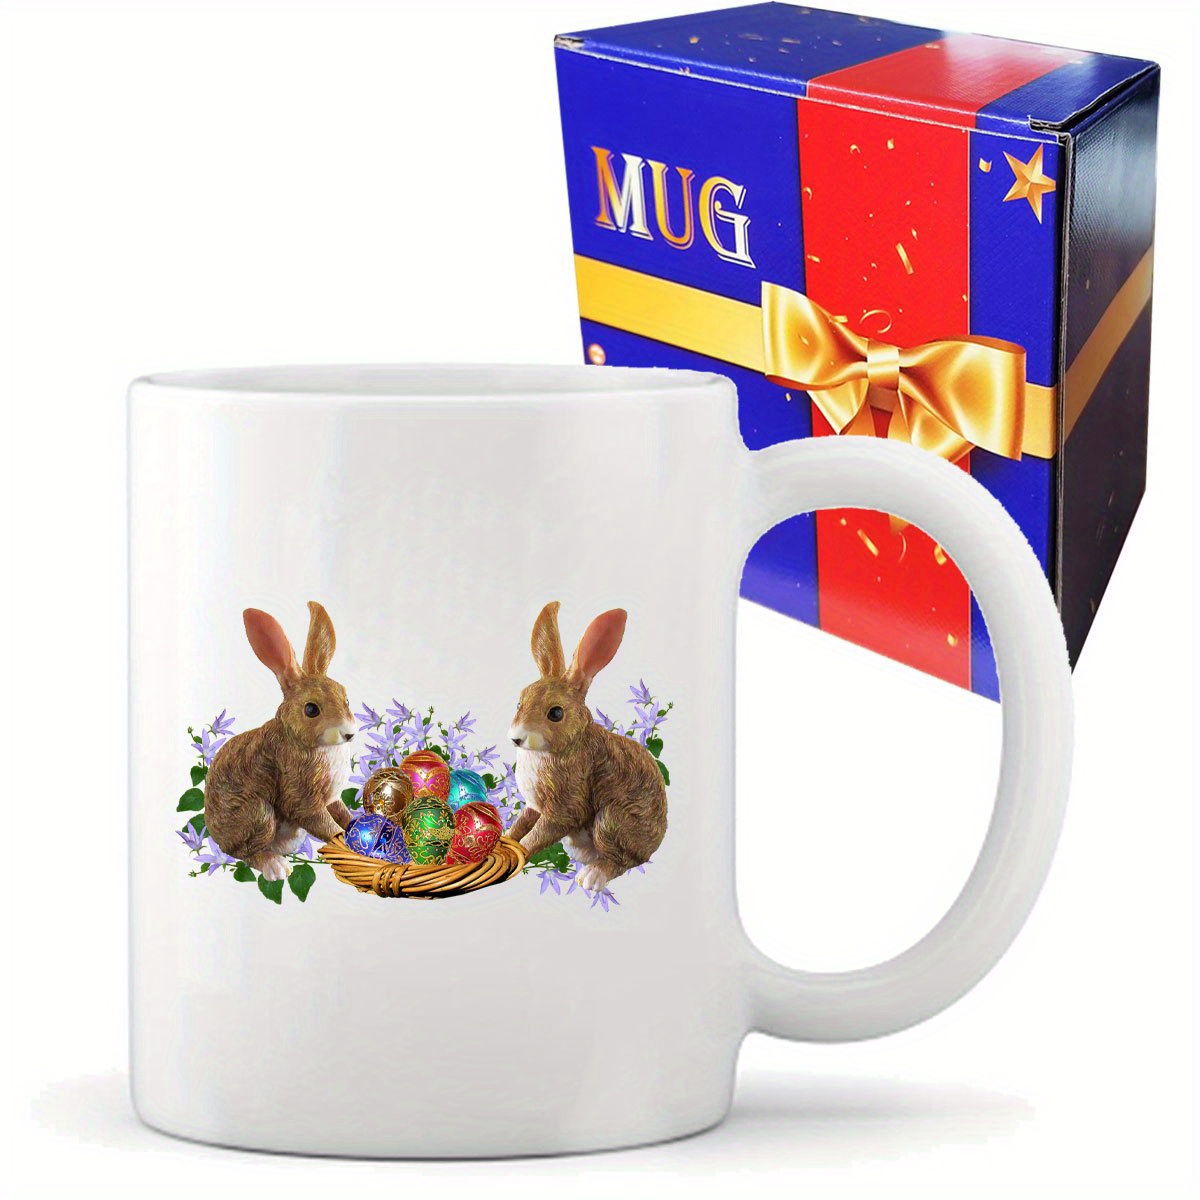 easter mug mr mrs rabbits coffee mug easter bunny ceramic tea mug cup for happy easter party home school office table centerpieces gift 11oz